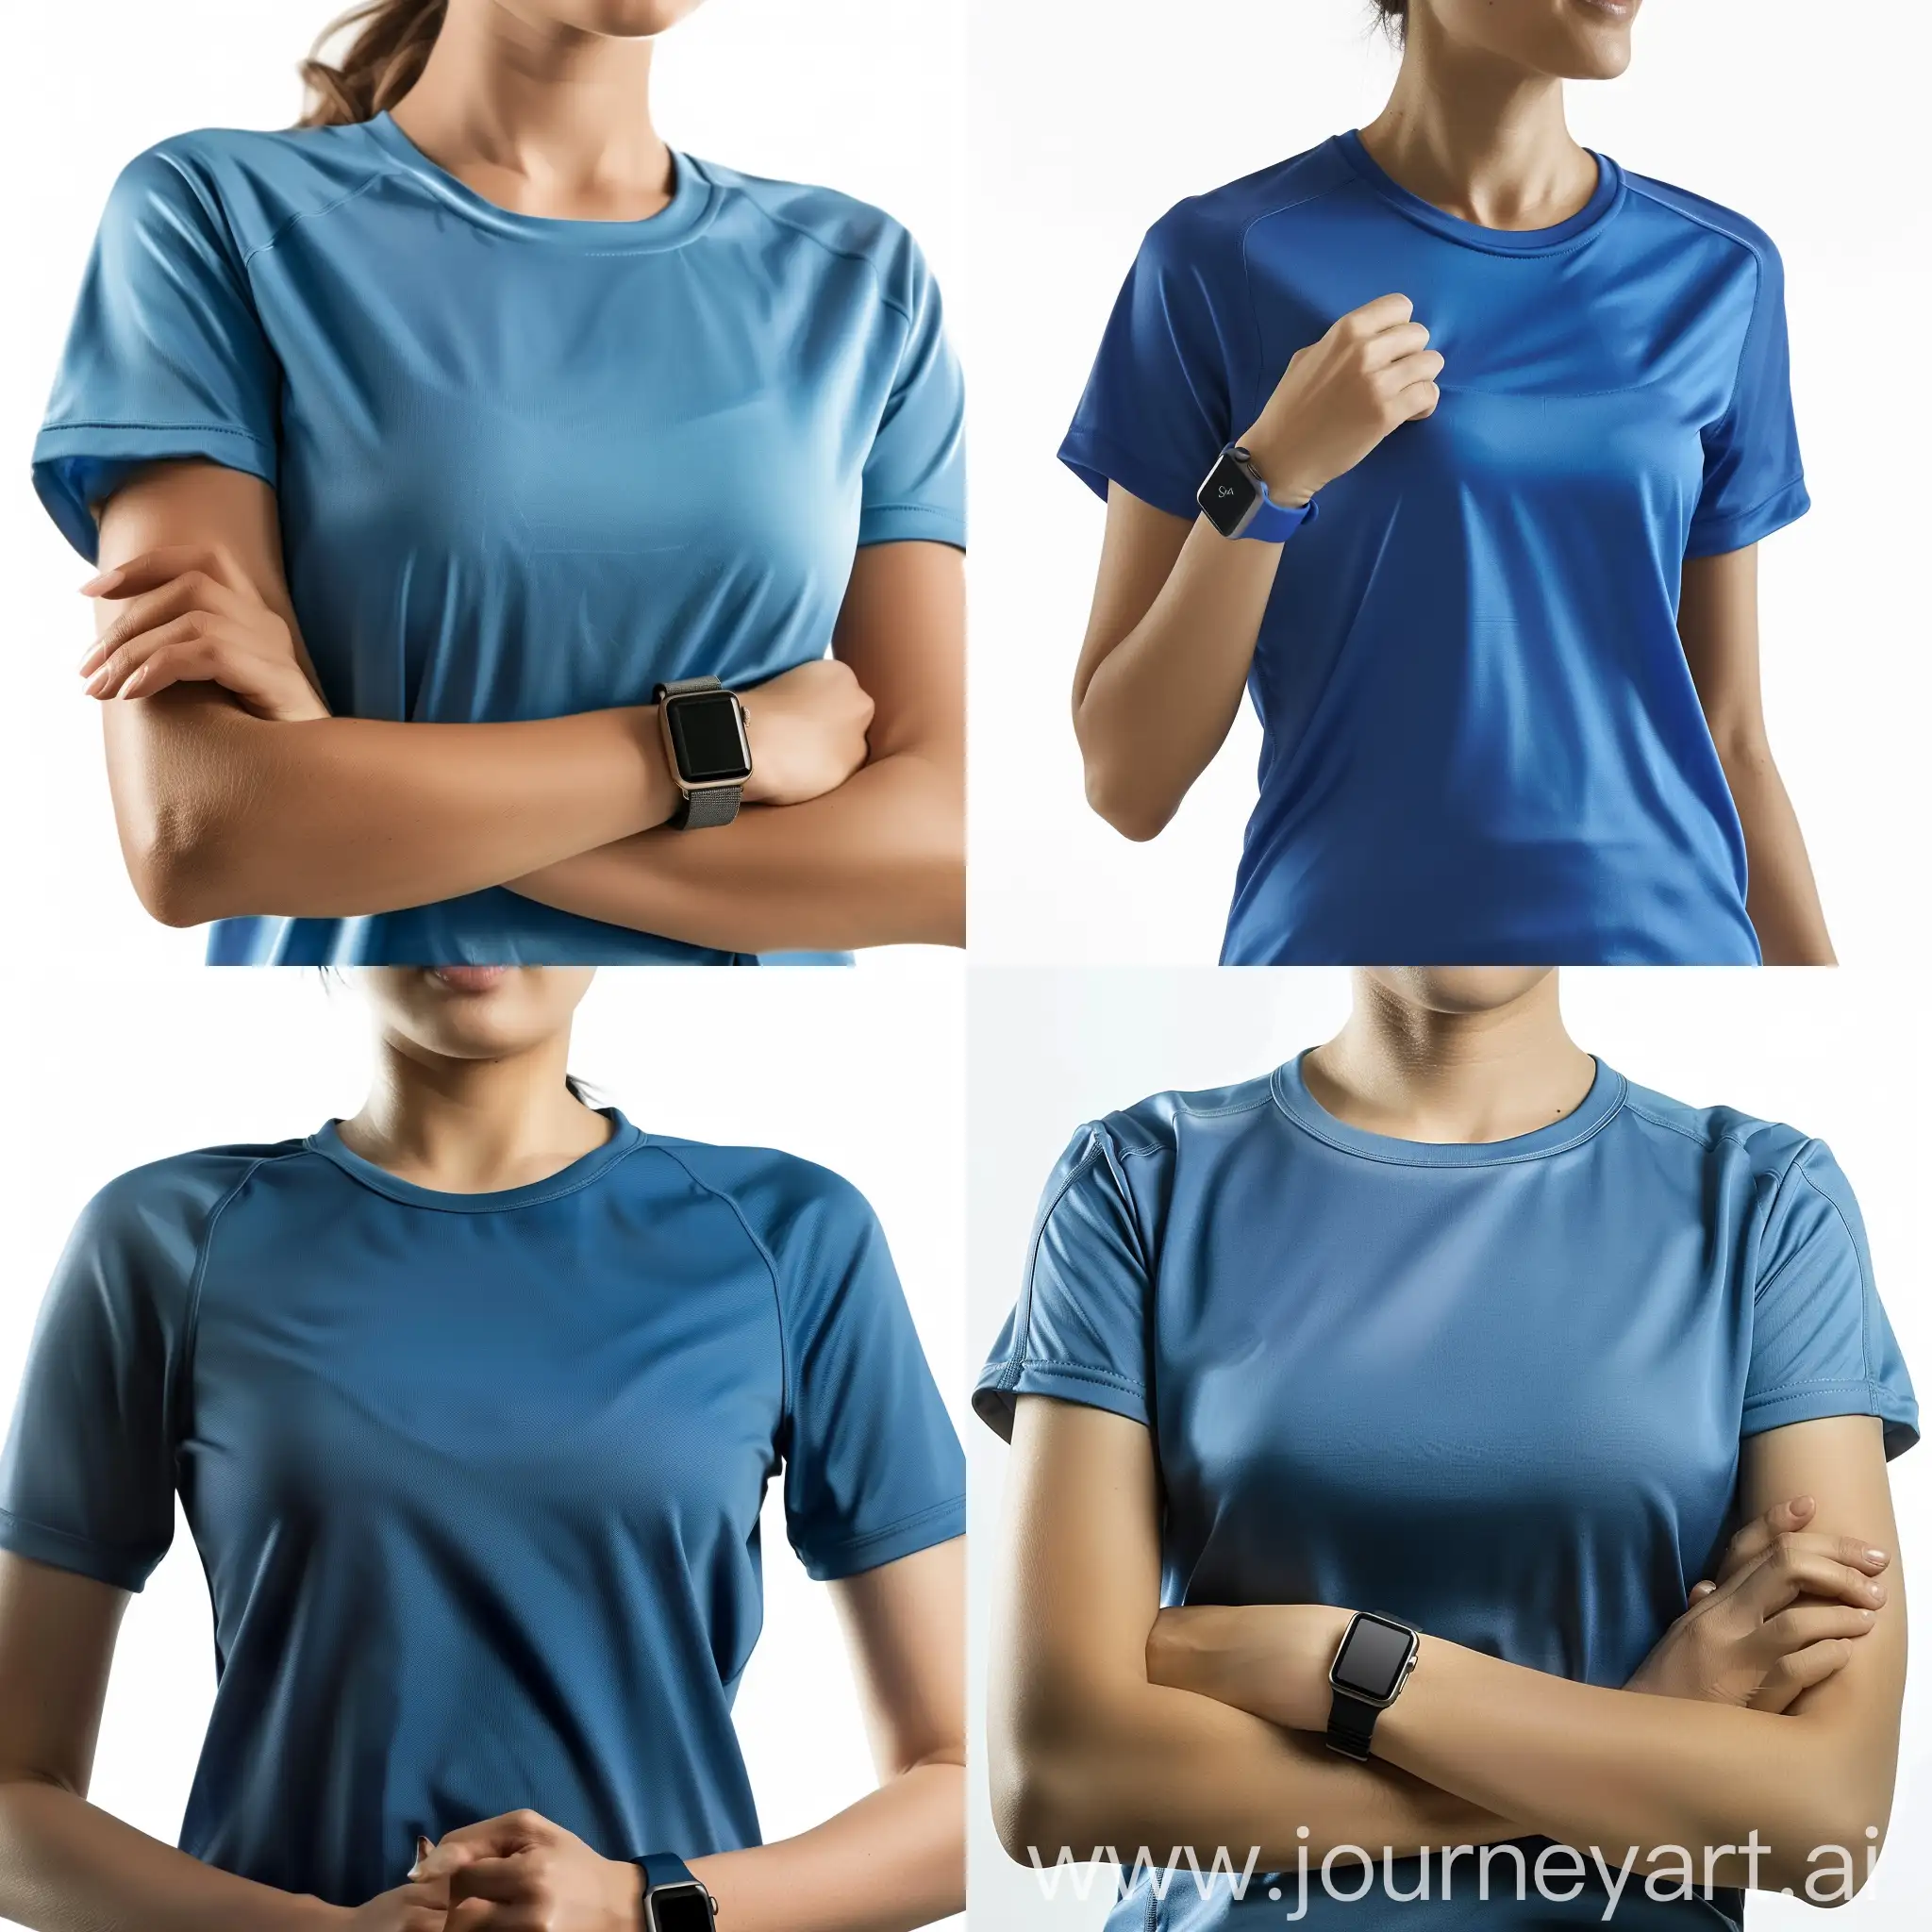 Realistic-Sports-Woman-Exercising-with-Apple-Watch-on-Blue-TShirt